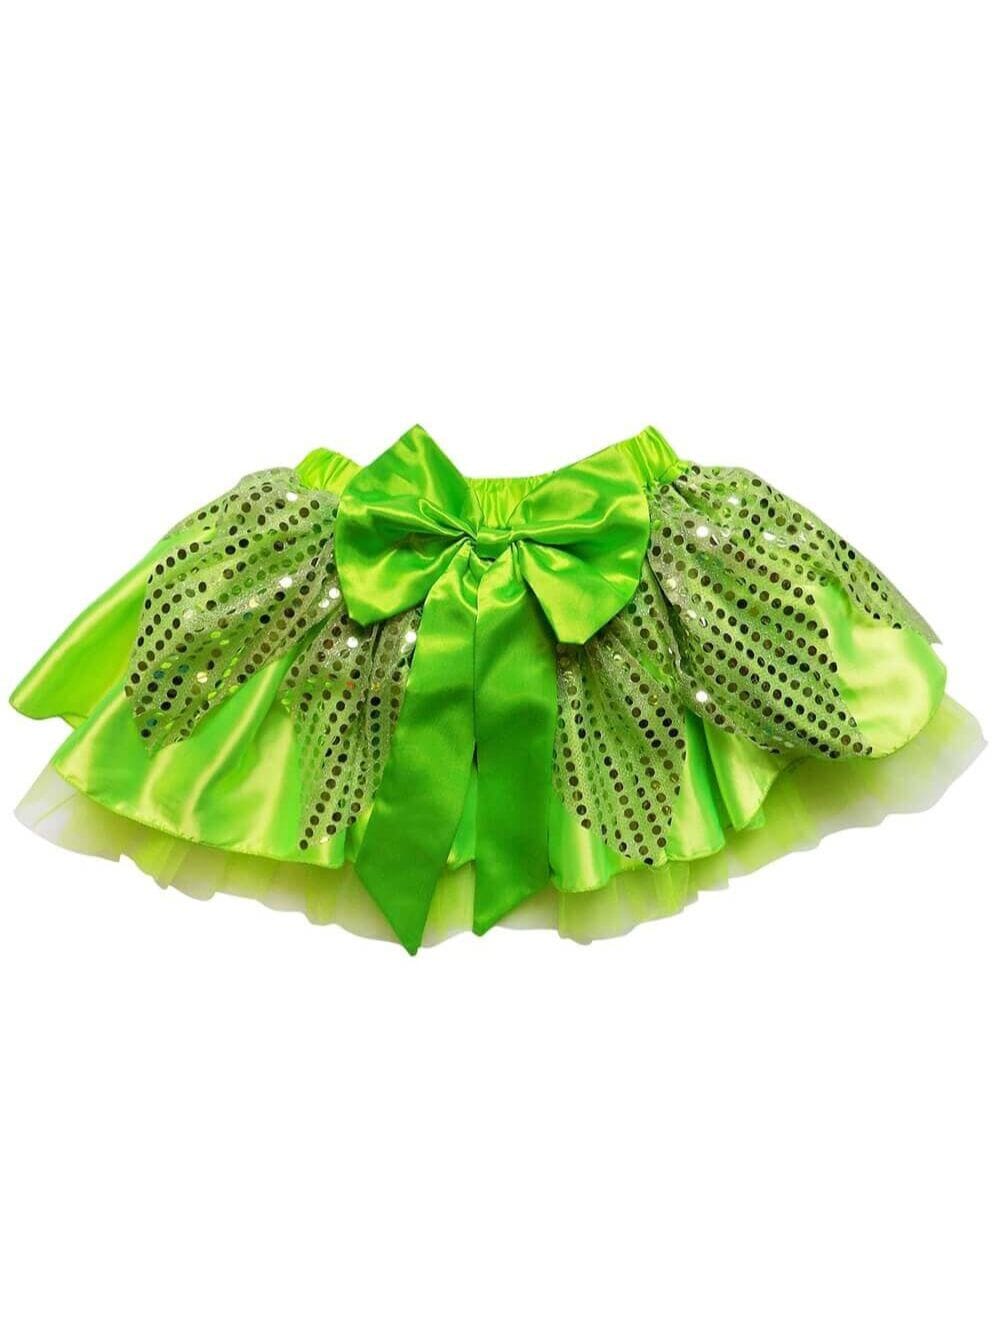 Green Fairy Tinkerbell Princess Costume Tutu Skirt in Kids, Adult, or Plus Size - Sydney So Sweet